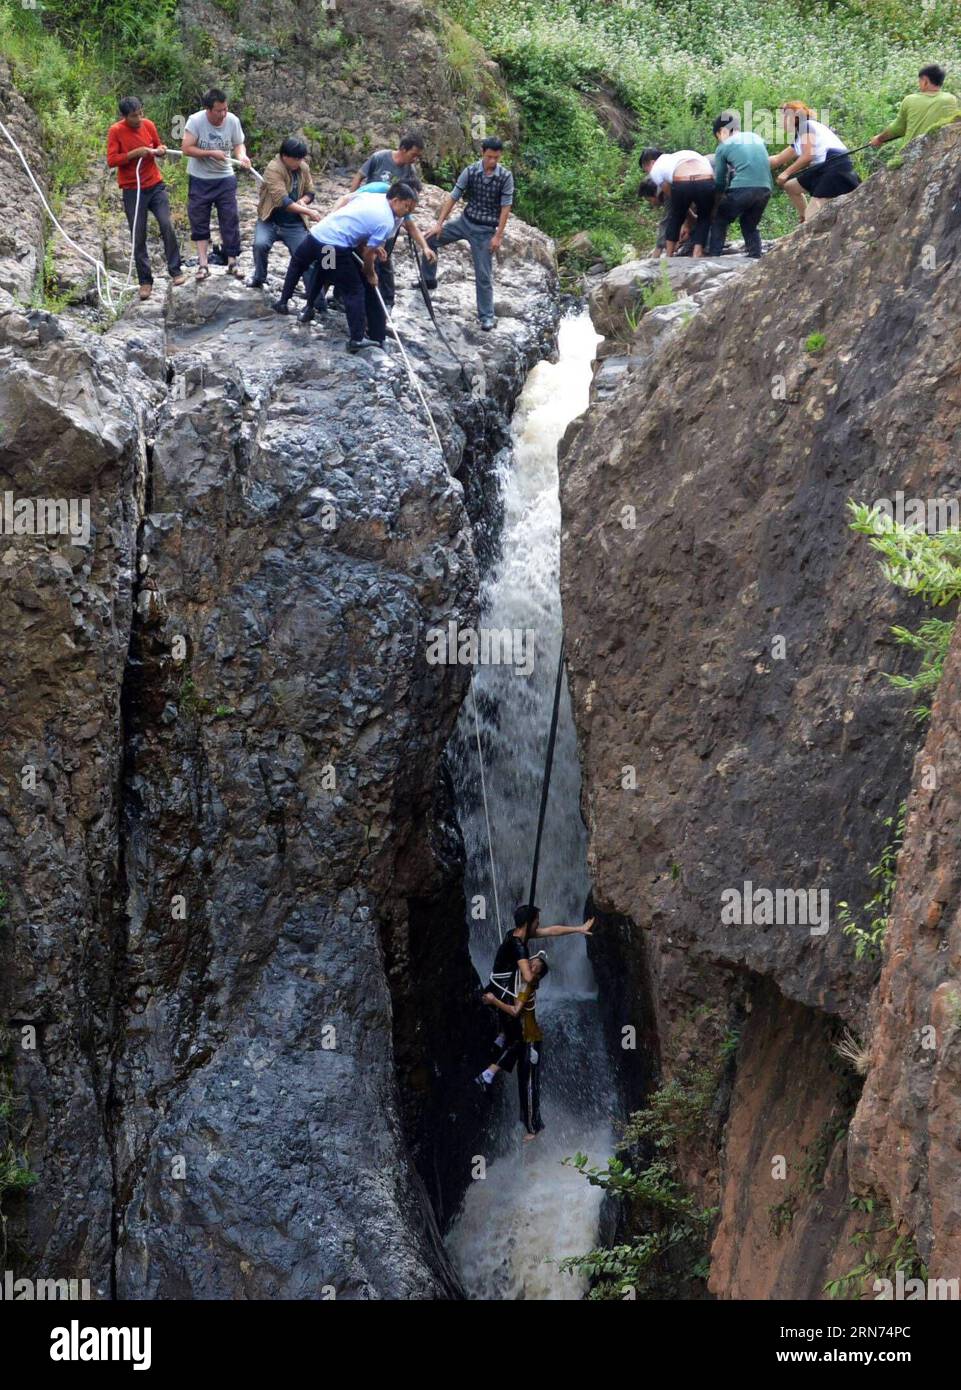 WEINING, Aug. 16, 2015 -- People rescue a boy at Diaoshui Village of Mazha Town in Weining County, southwest China s Guizhou Province, Aug. 16, 2015. The boy was washed down the waterfall and hung between the cliffs on Sunday. ) (yl) CHINA-GUIZHOU-WEINING-CHILD-CLIFF RESCUE(CN) YangxWenbin PUBLICATIONxNOTxINxCHN   Weining Aug 16 2015 Celebrities Rescue a Boy AT  Village of Mazha Town in Weining County Southwest China S Guizhou Province Aug 16 2015 The Boy what washed Down The Waterfall and Hung between The Cliffs ON Sunday YL China Guizhou Weining Child Cliff Rescue CN YangxWenbin PUBLICATIONx Stock Photo